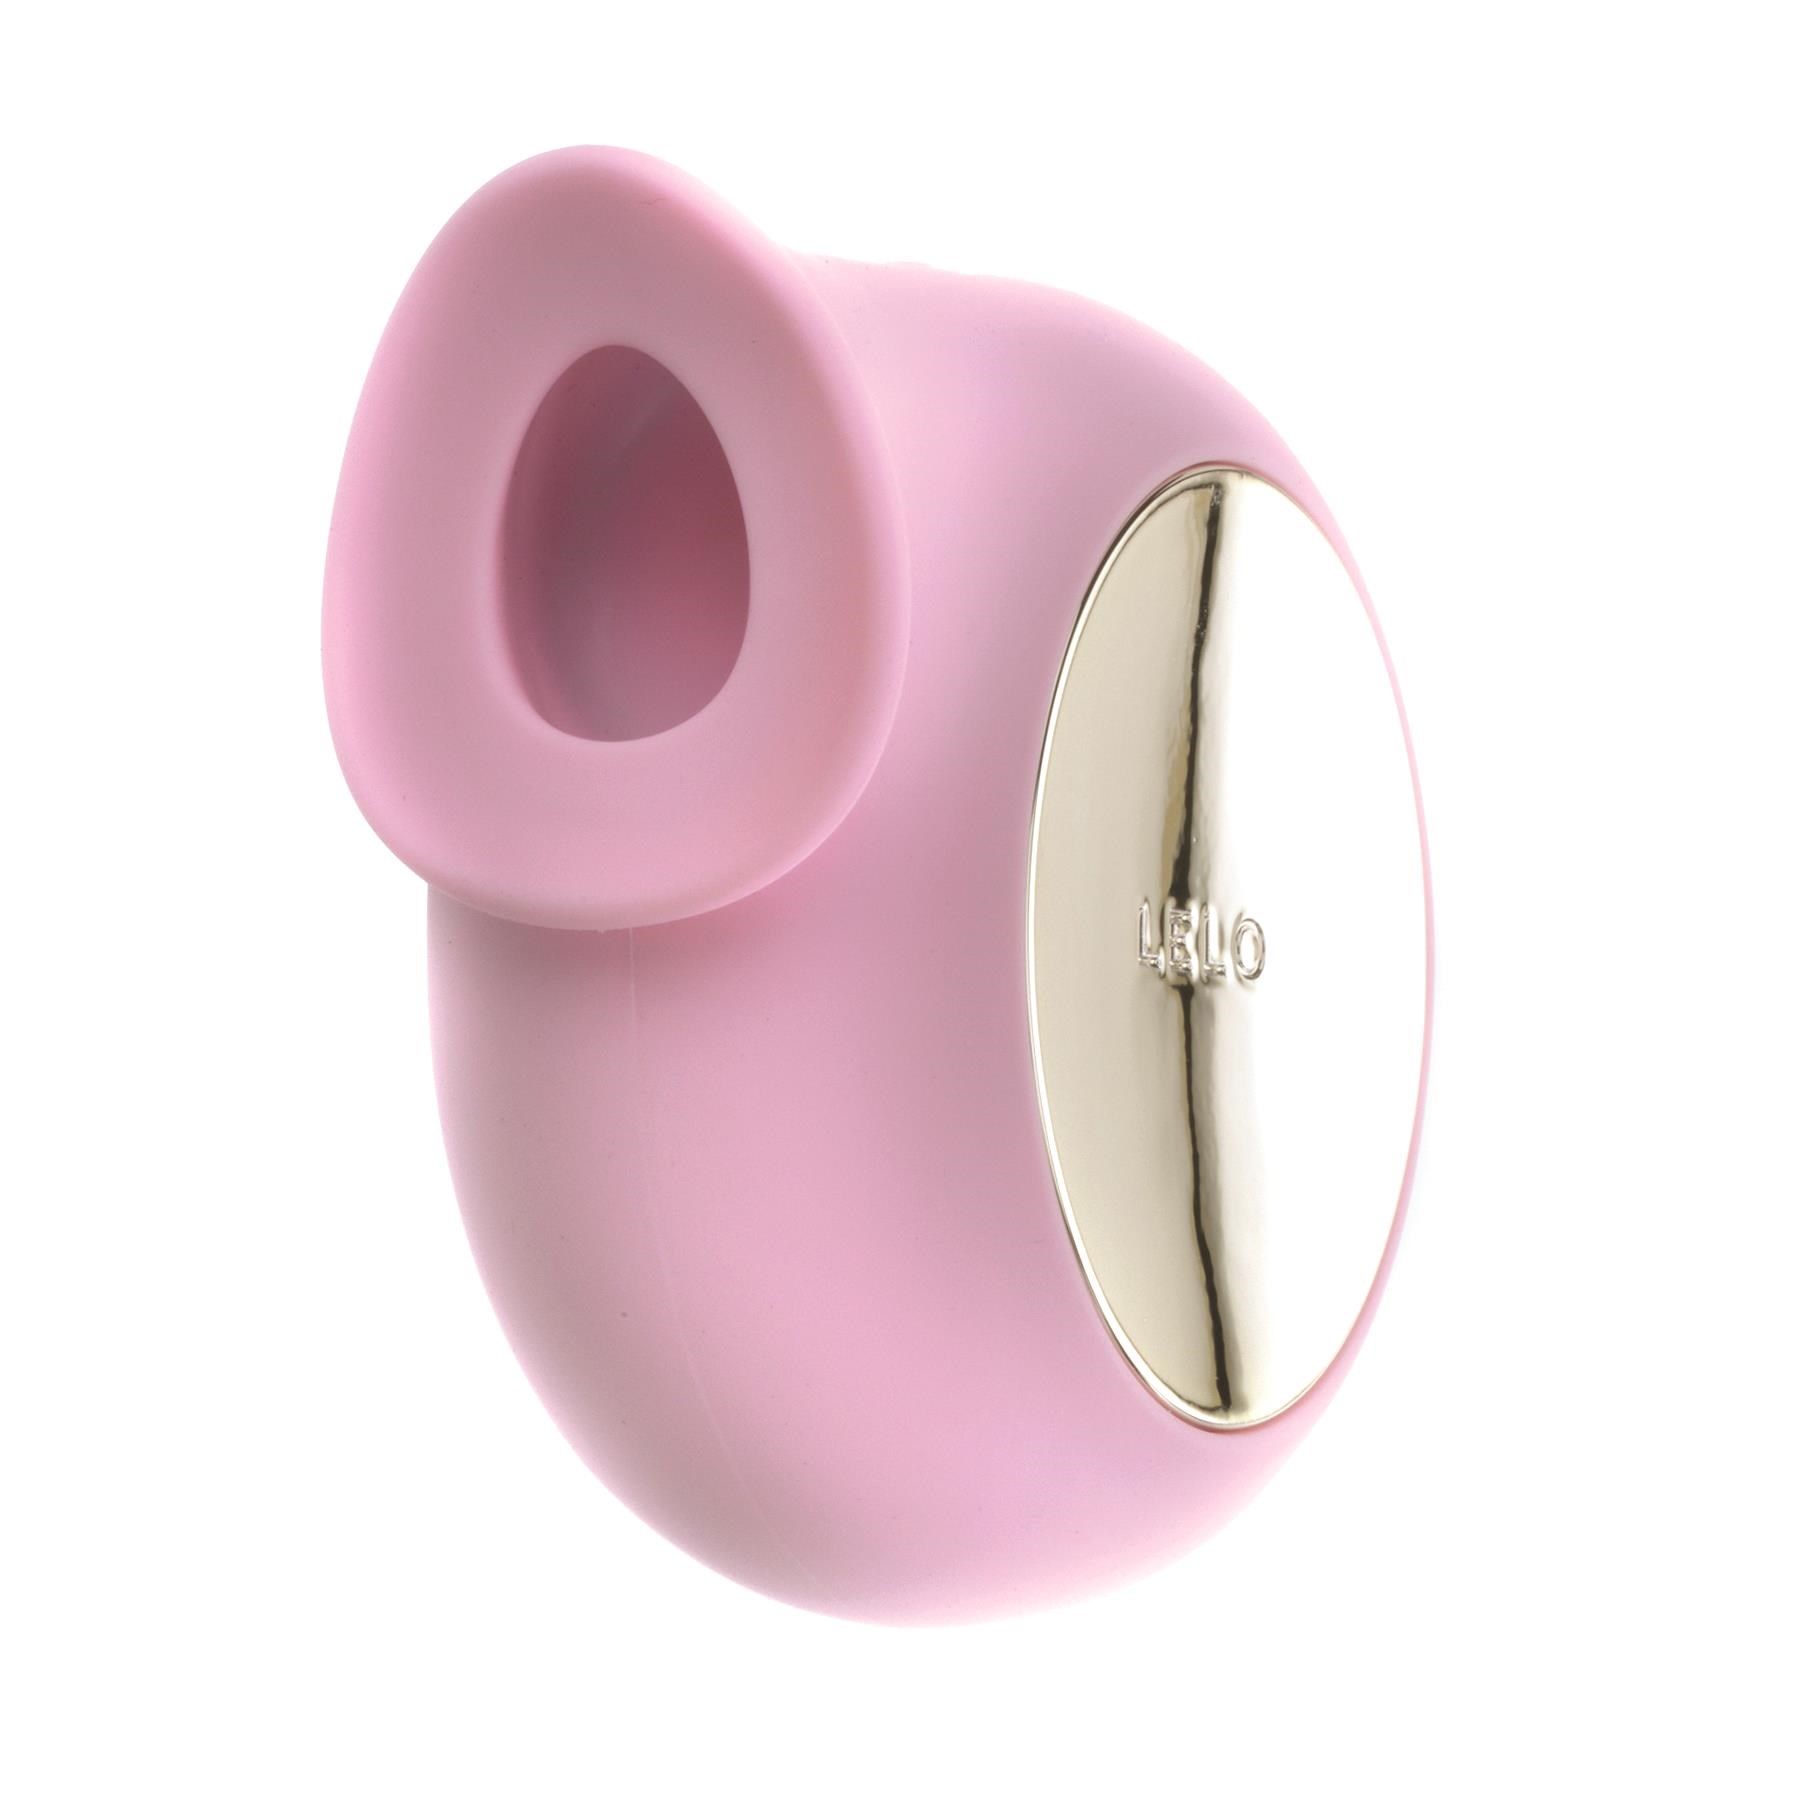 Lelo Sila Cruise Sonic Clitoral Massager - Product Shot #1